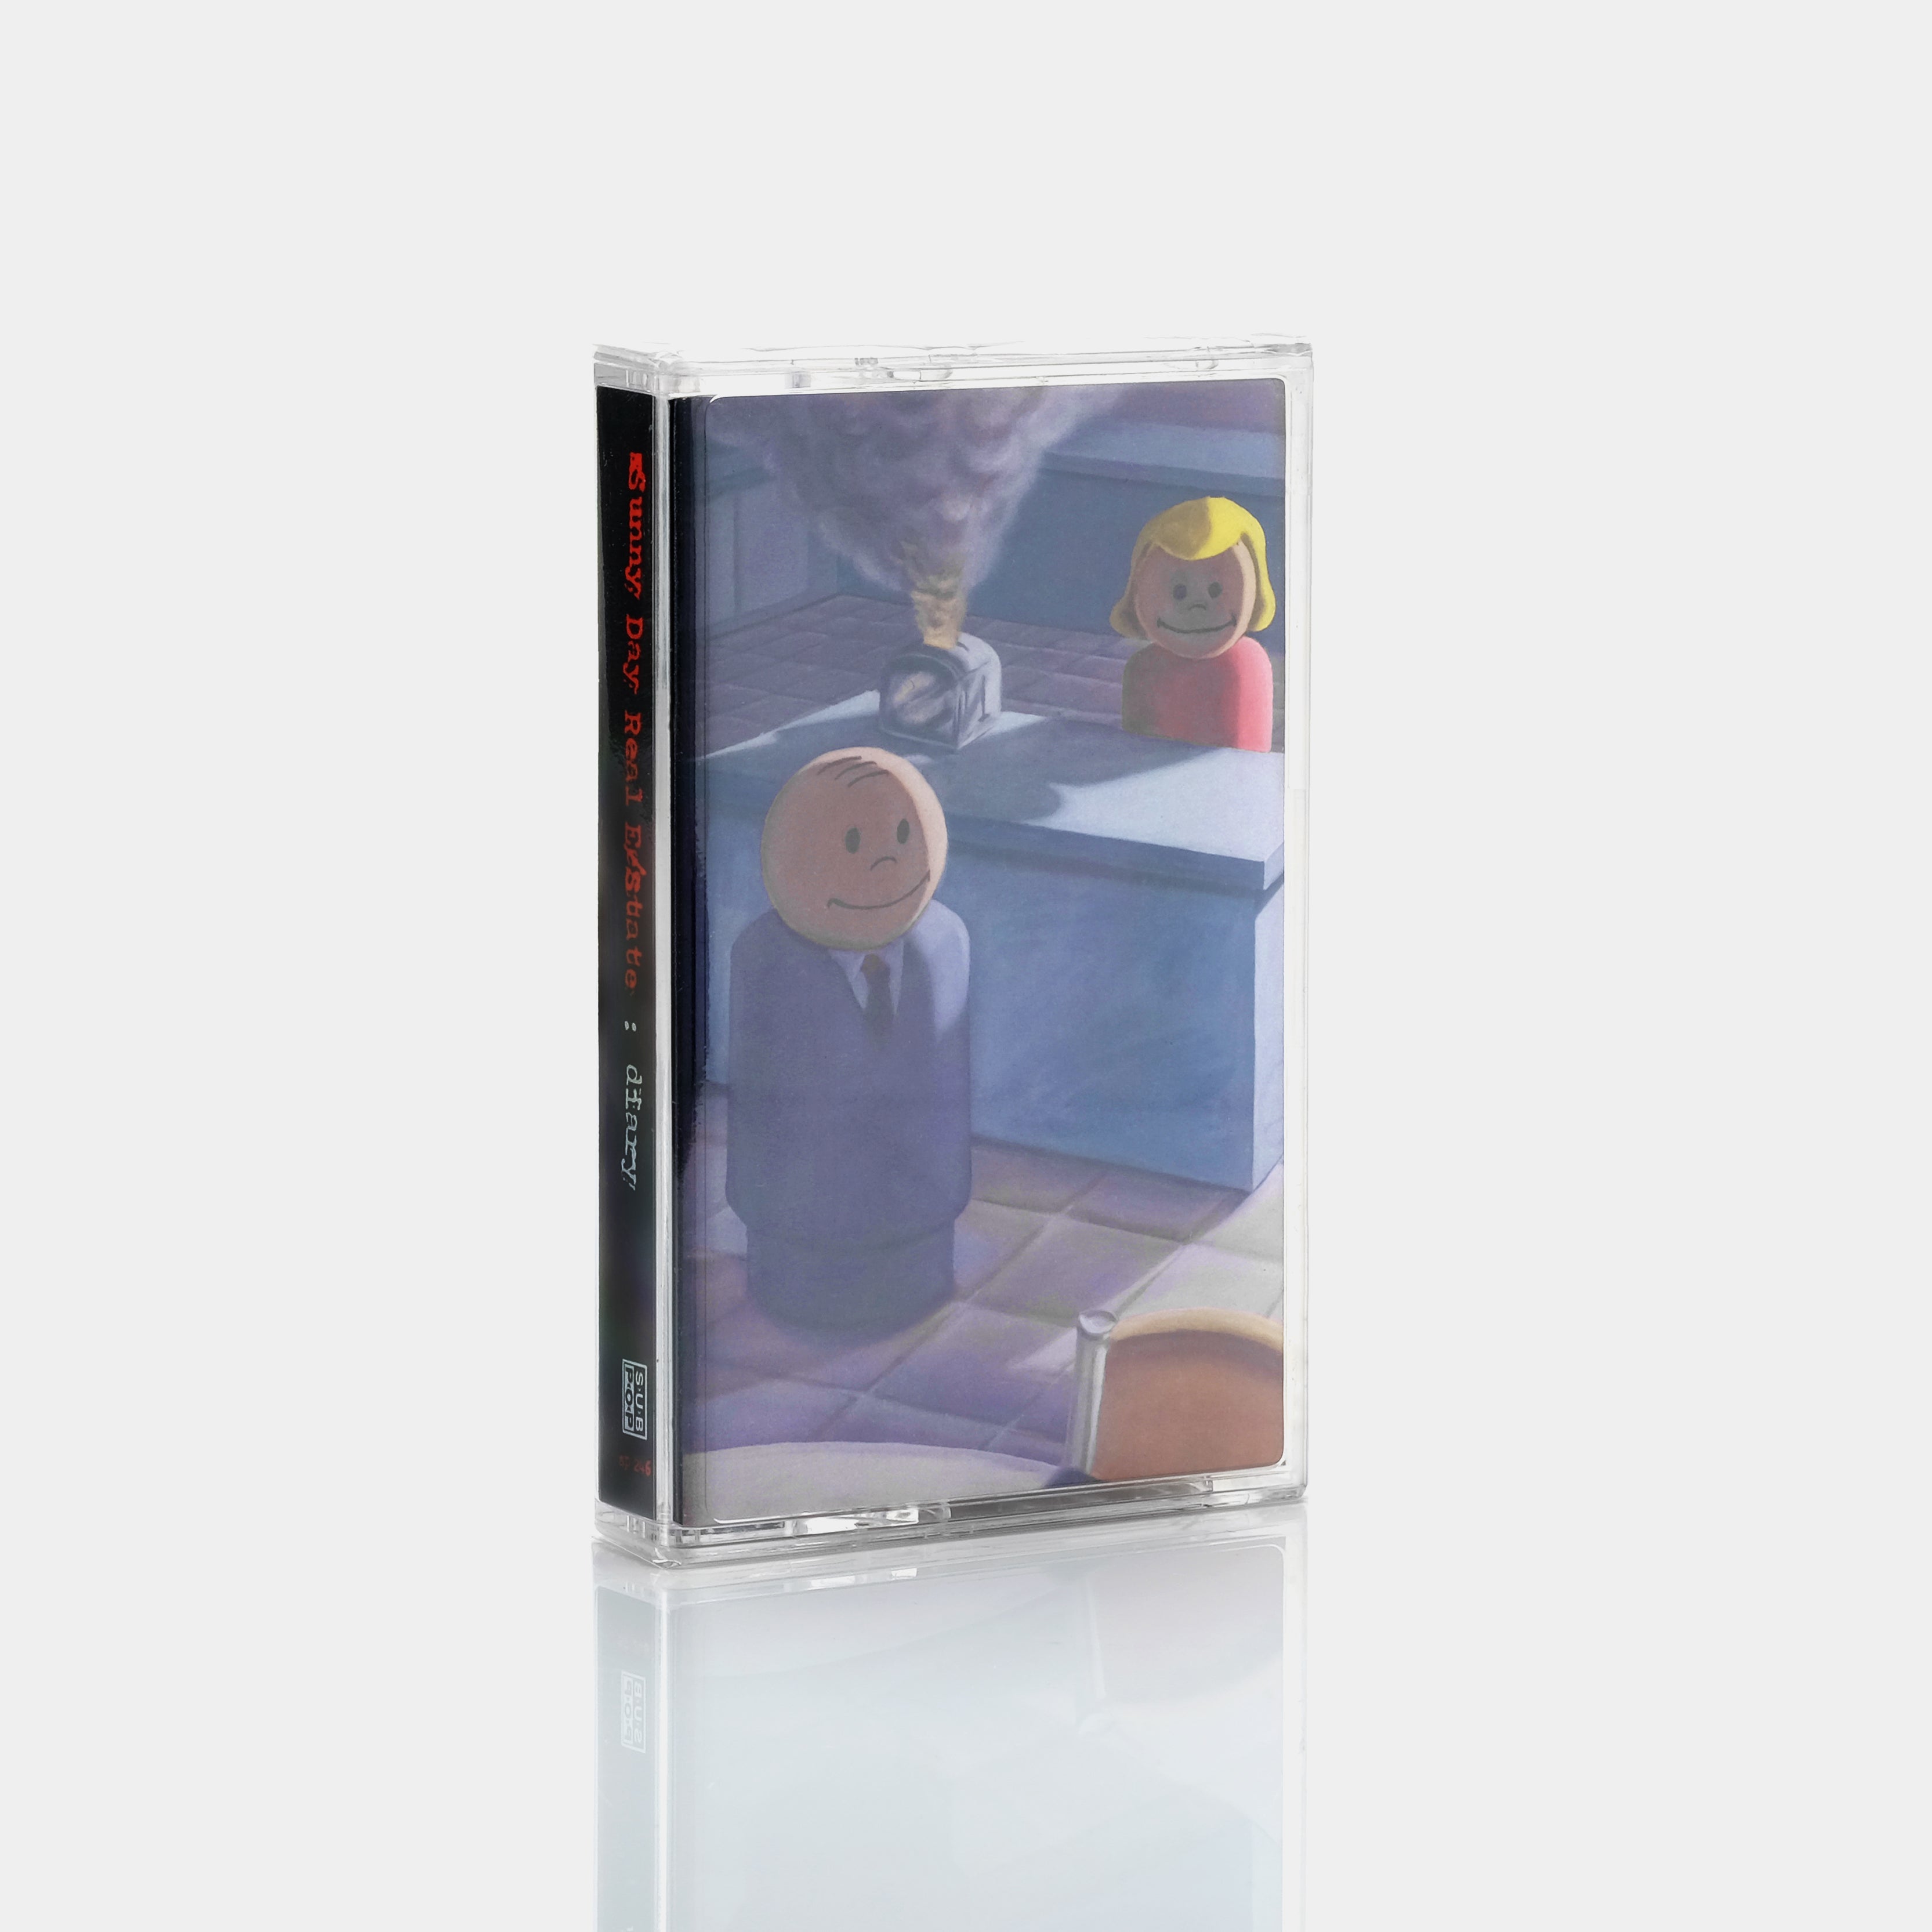 Sunny Day Real Estate - Diary Cassette Tape